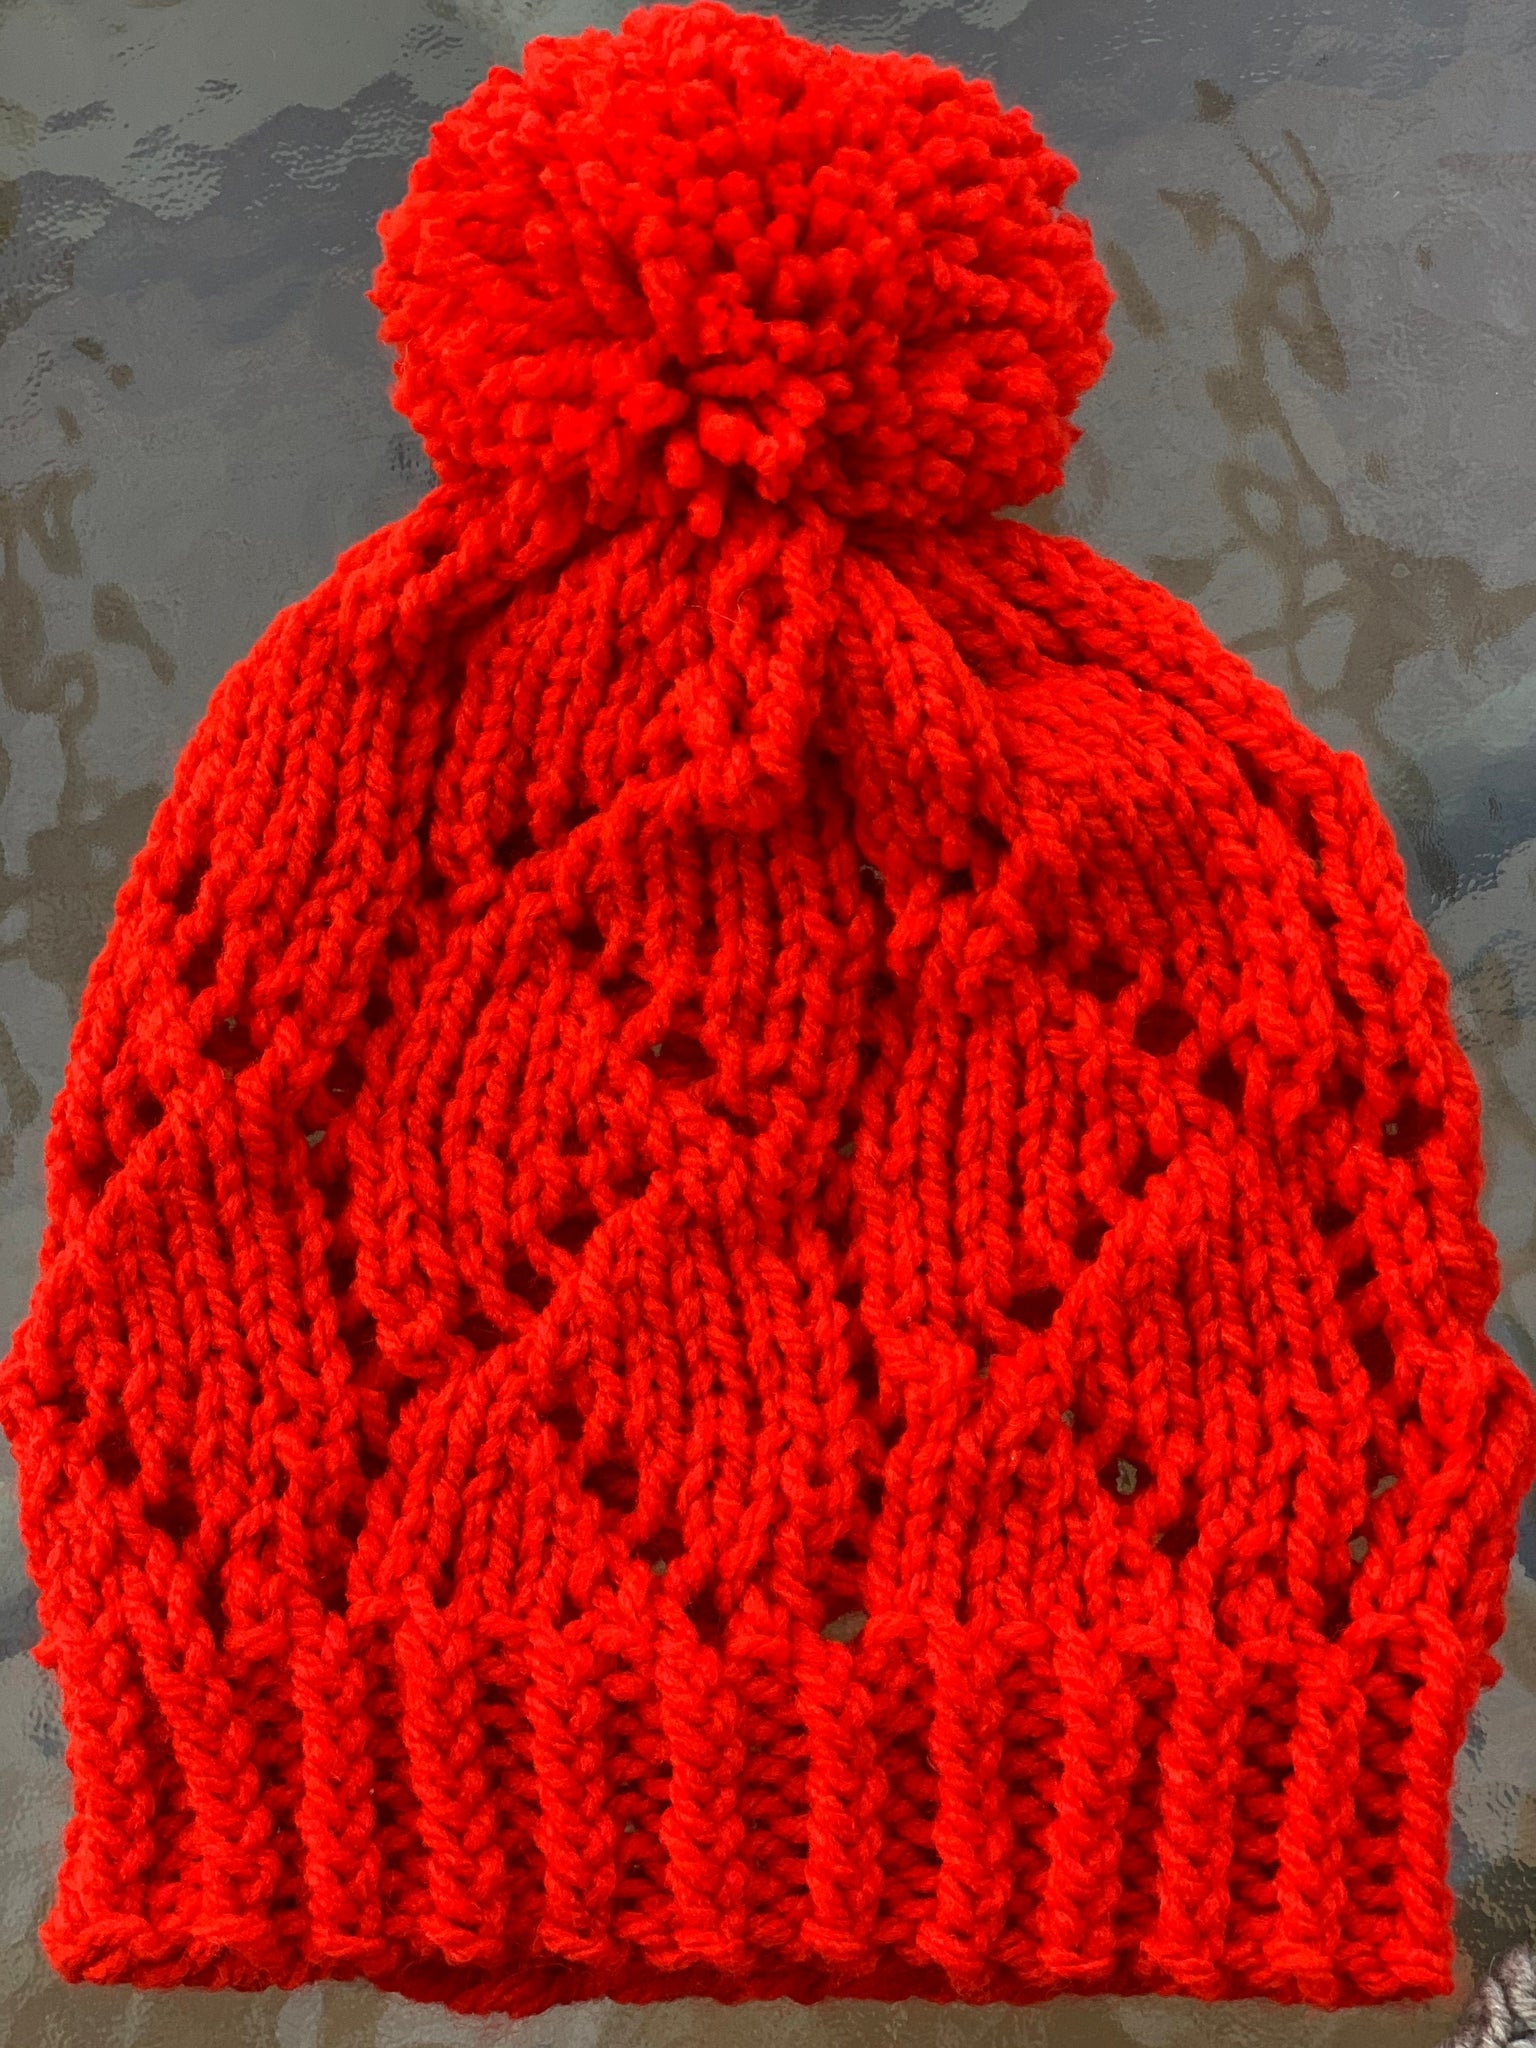 Loom Knit Cables in Color Hat